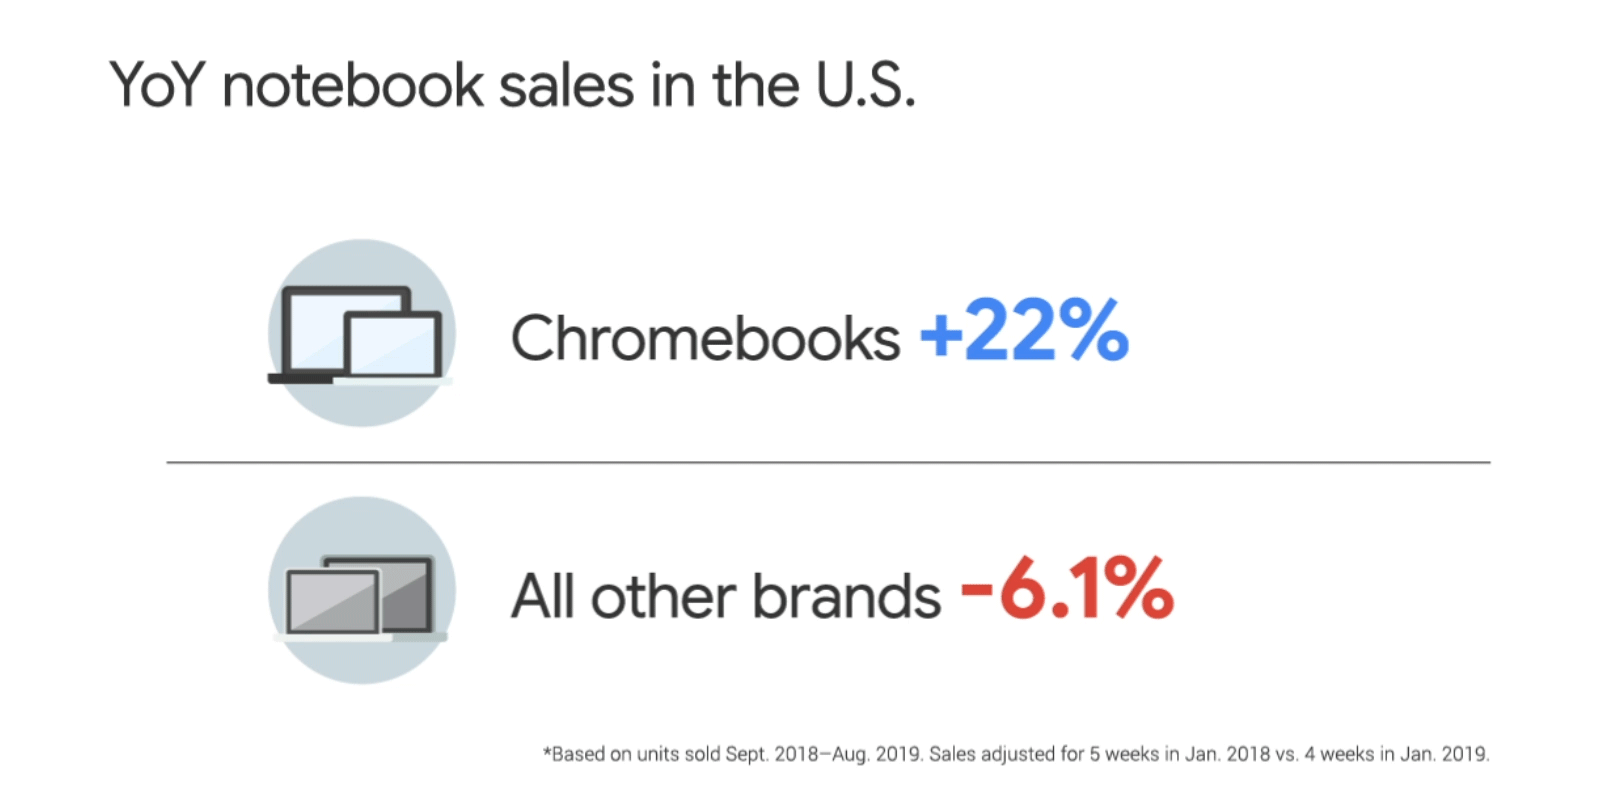 YoY notebook sales in the U.S.